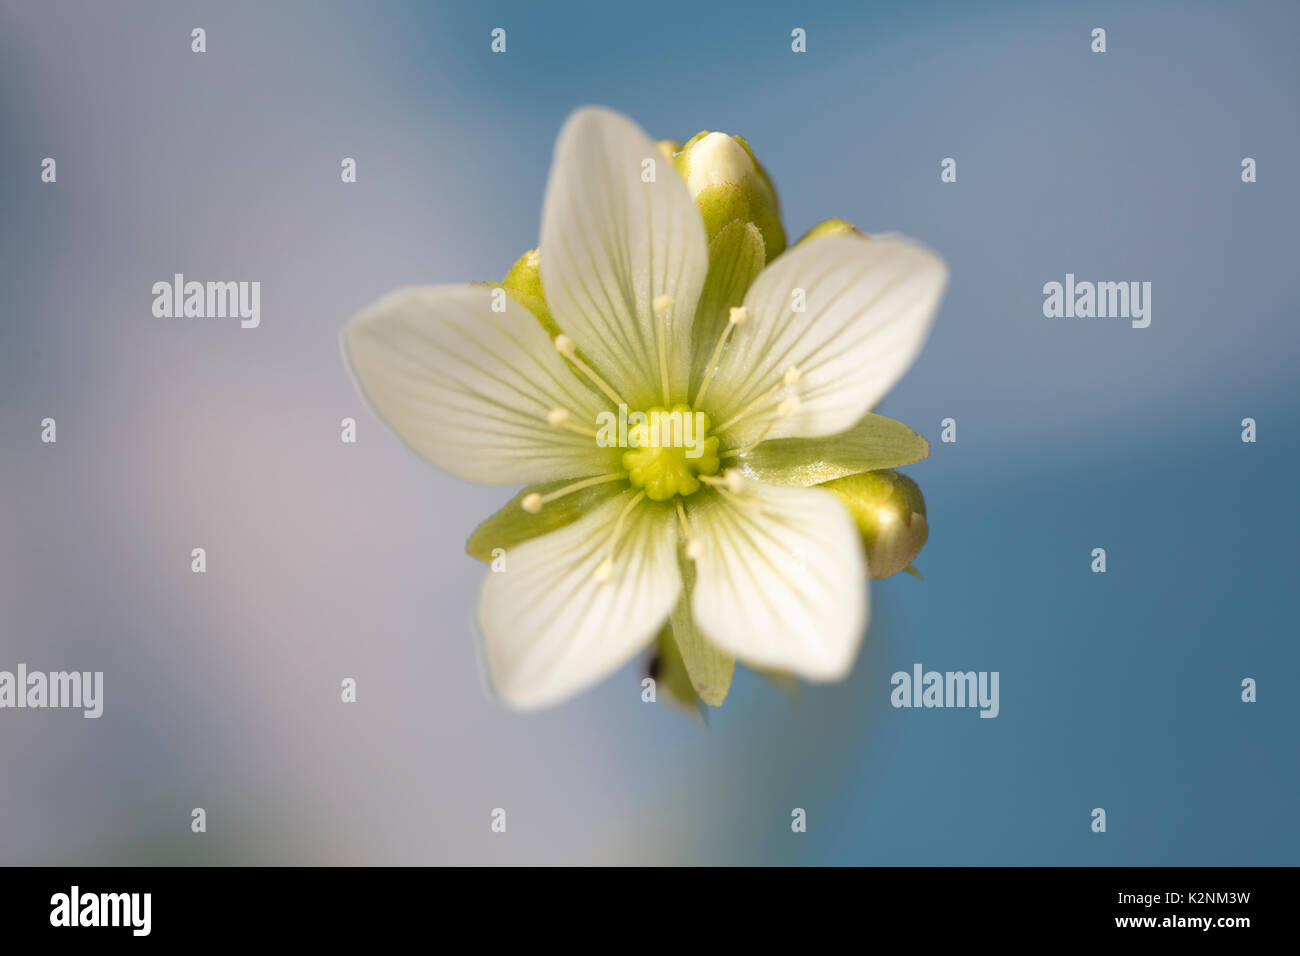 Venus Flytrap flower with soft white petals in full bloom Stock Photo